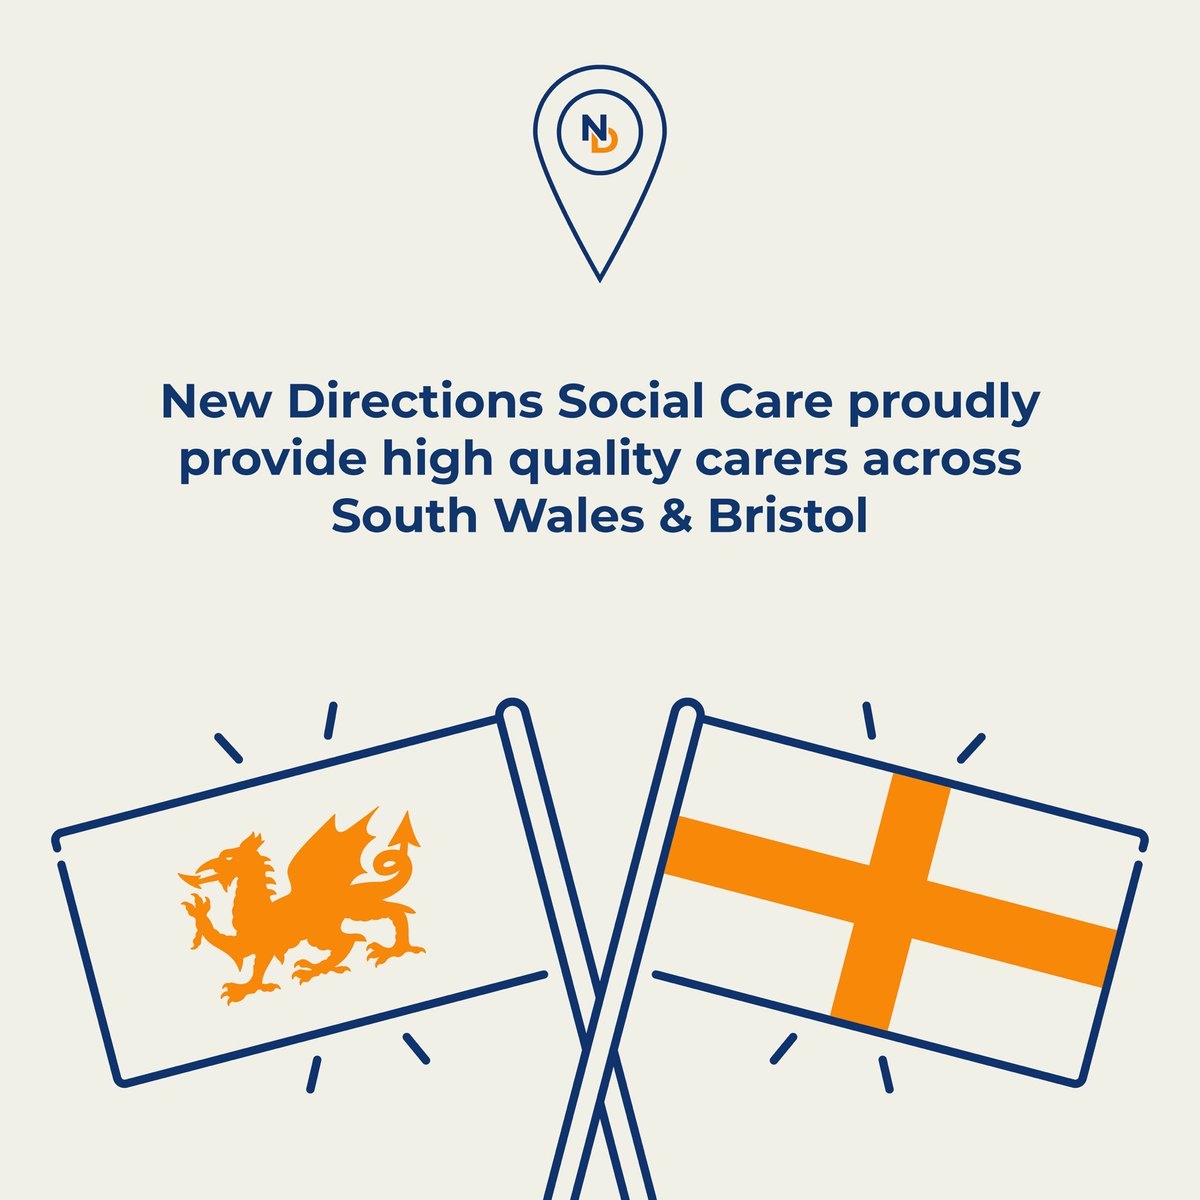 Providing carers across South Wales and Bristol👏🏼

#newdirections #socialcare #southwales #bristol #carers #ndsocialcare